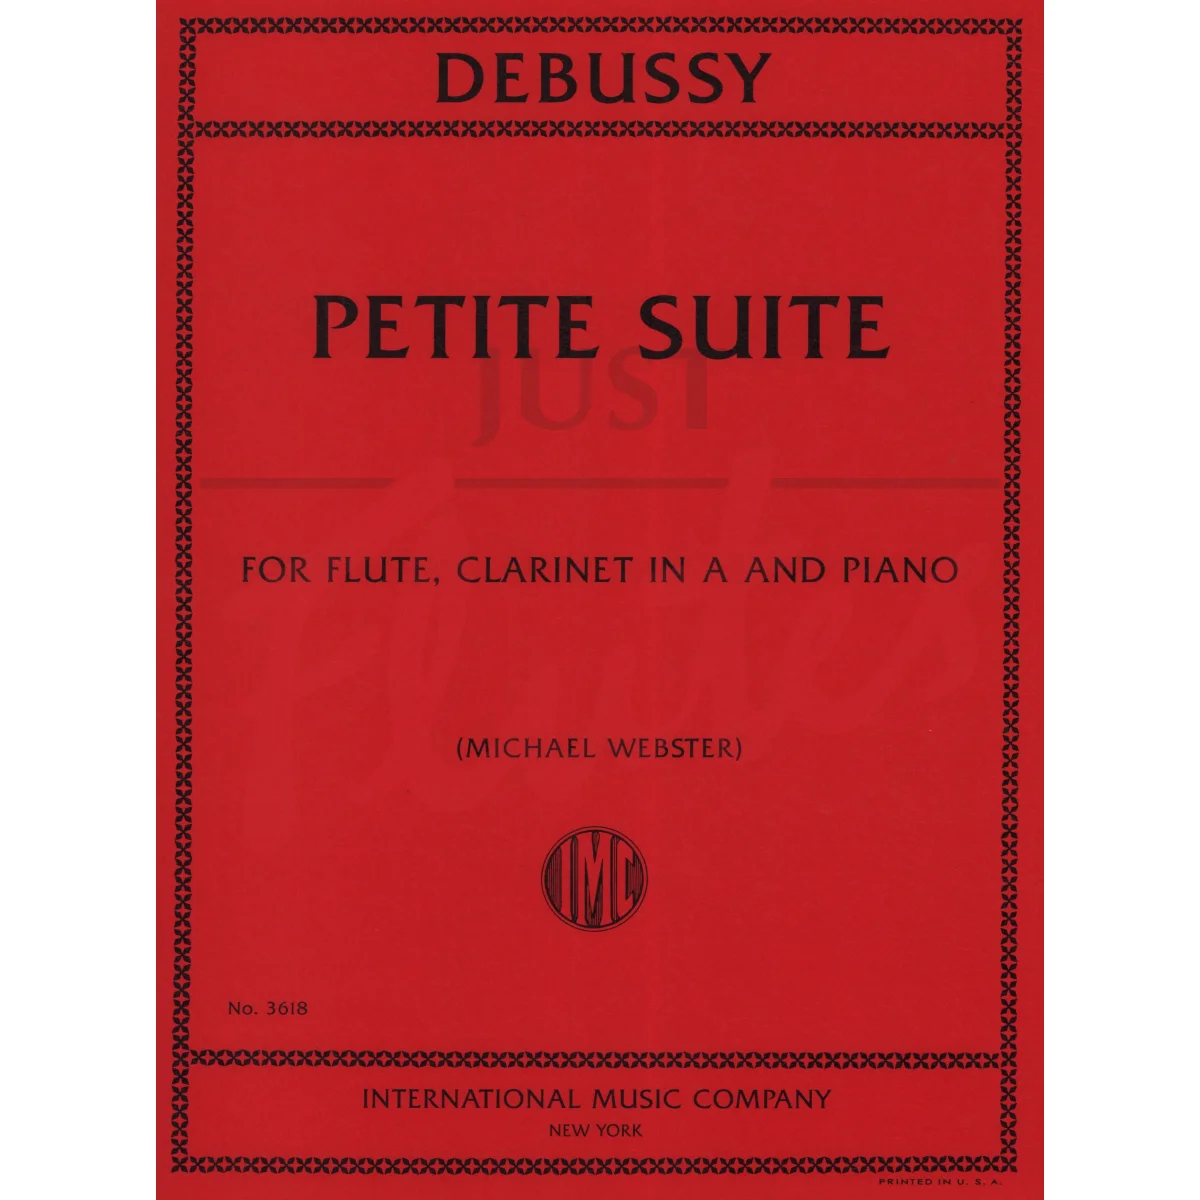 Petite Suite for Flute, Clarinet in A and Piano